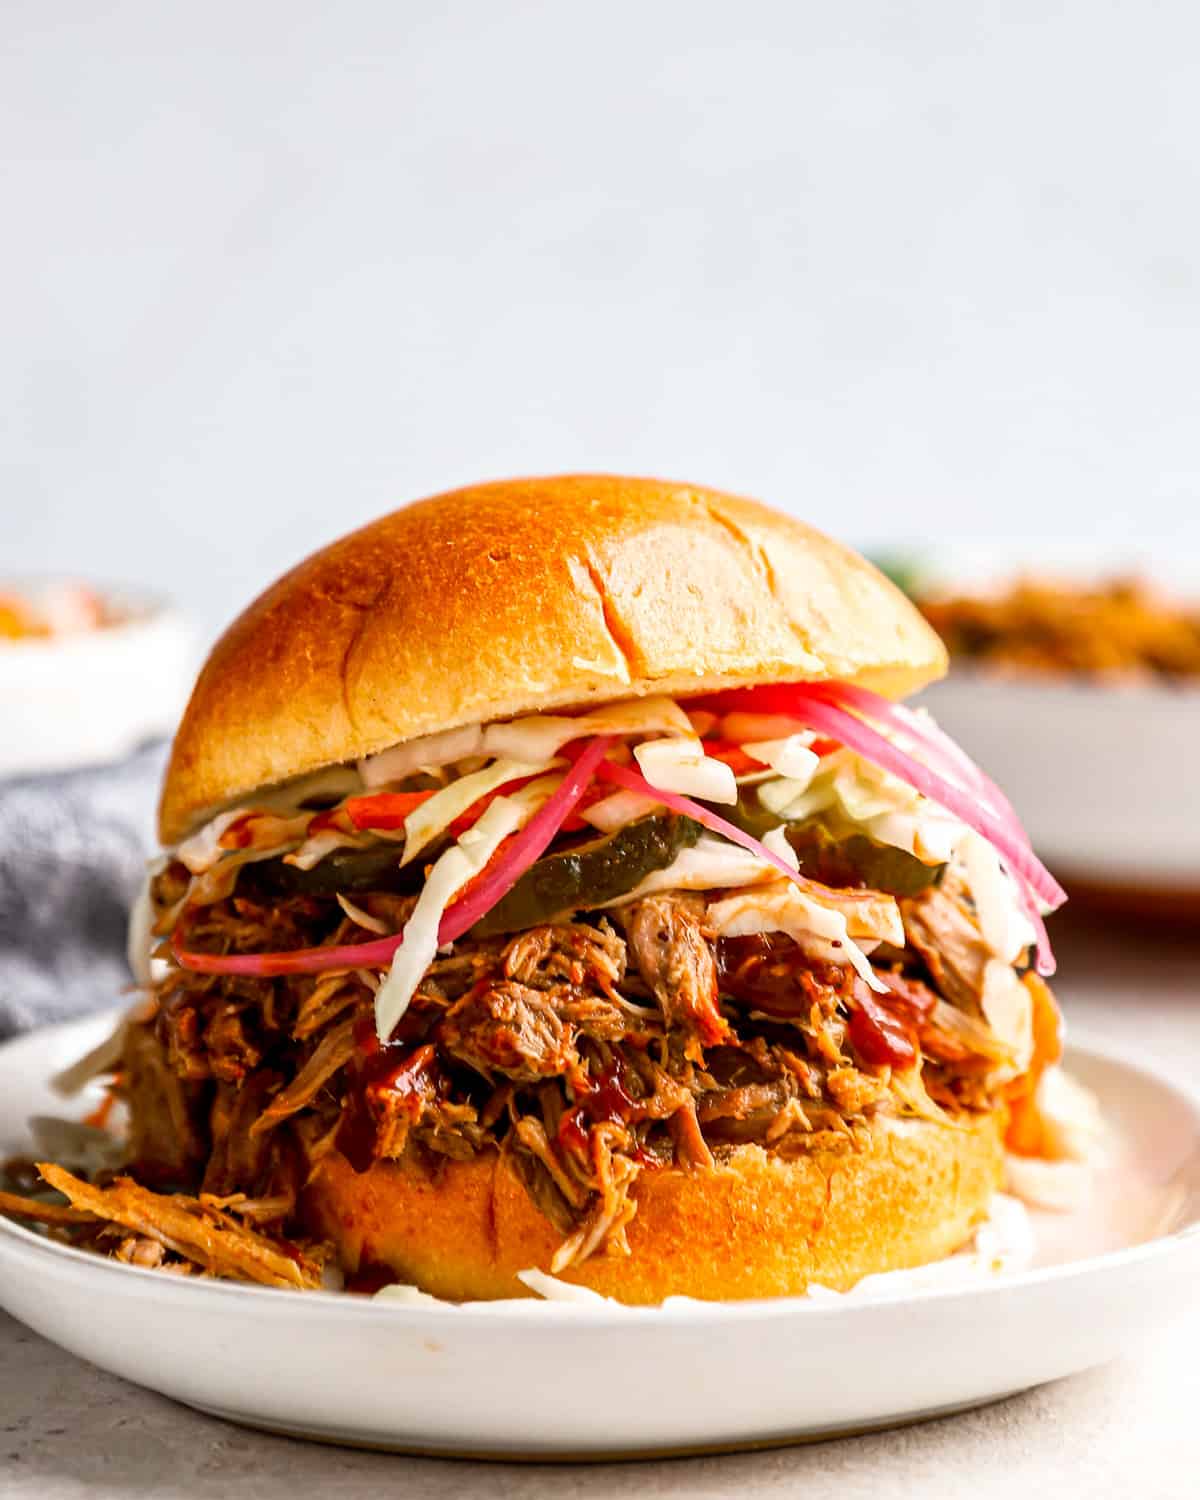 a Crockpot pulled pork sandwich on a plate with coleslaw.